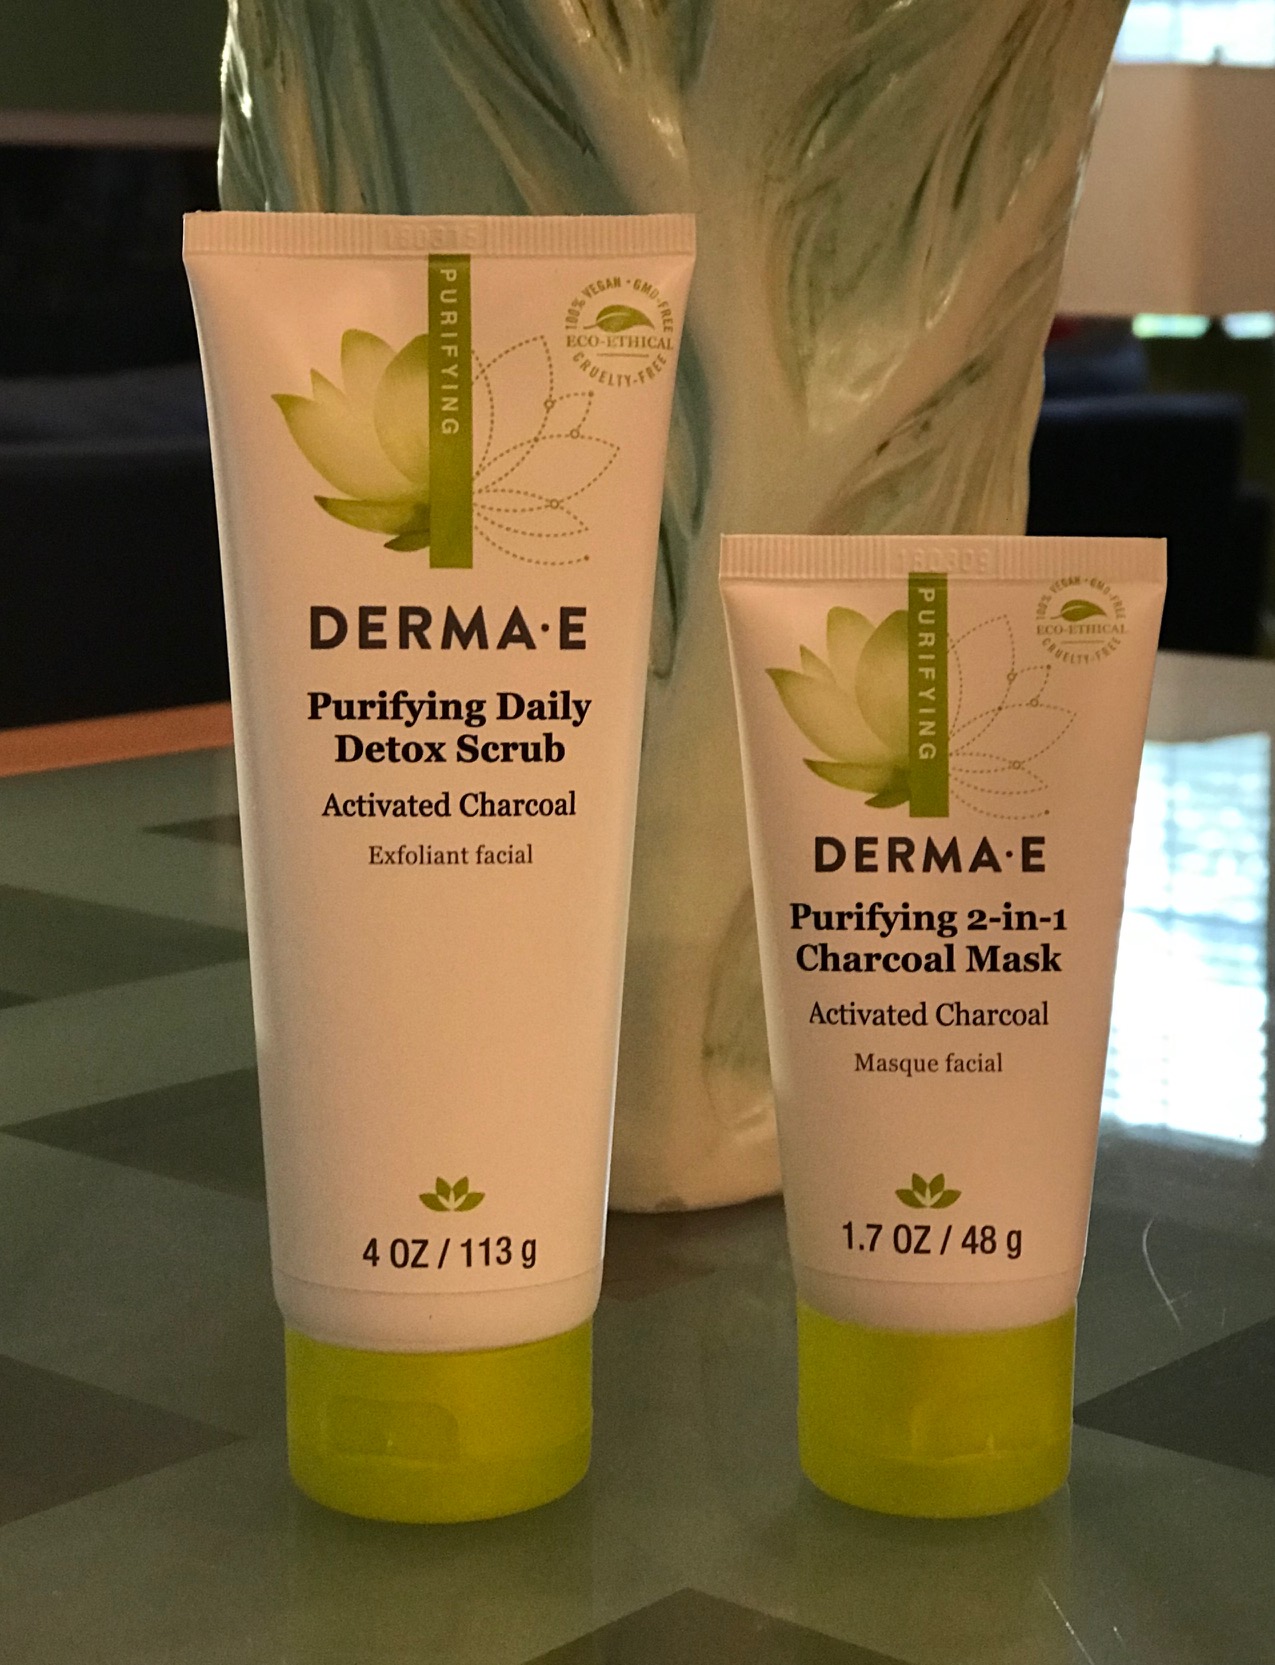 standing tubes of Derma E Purifying Daily Detox Scrub & 2-in-1 Charcoal Mask, neversaydiebeauty.com